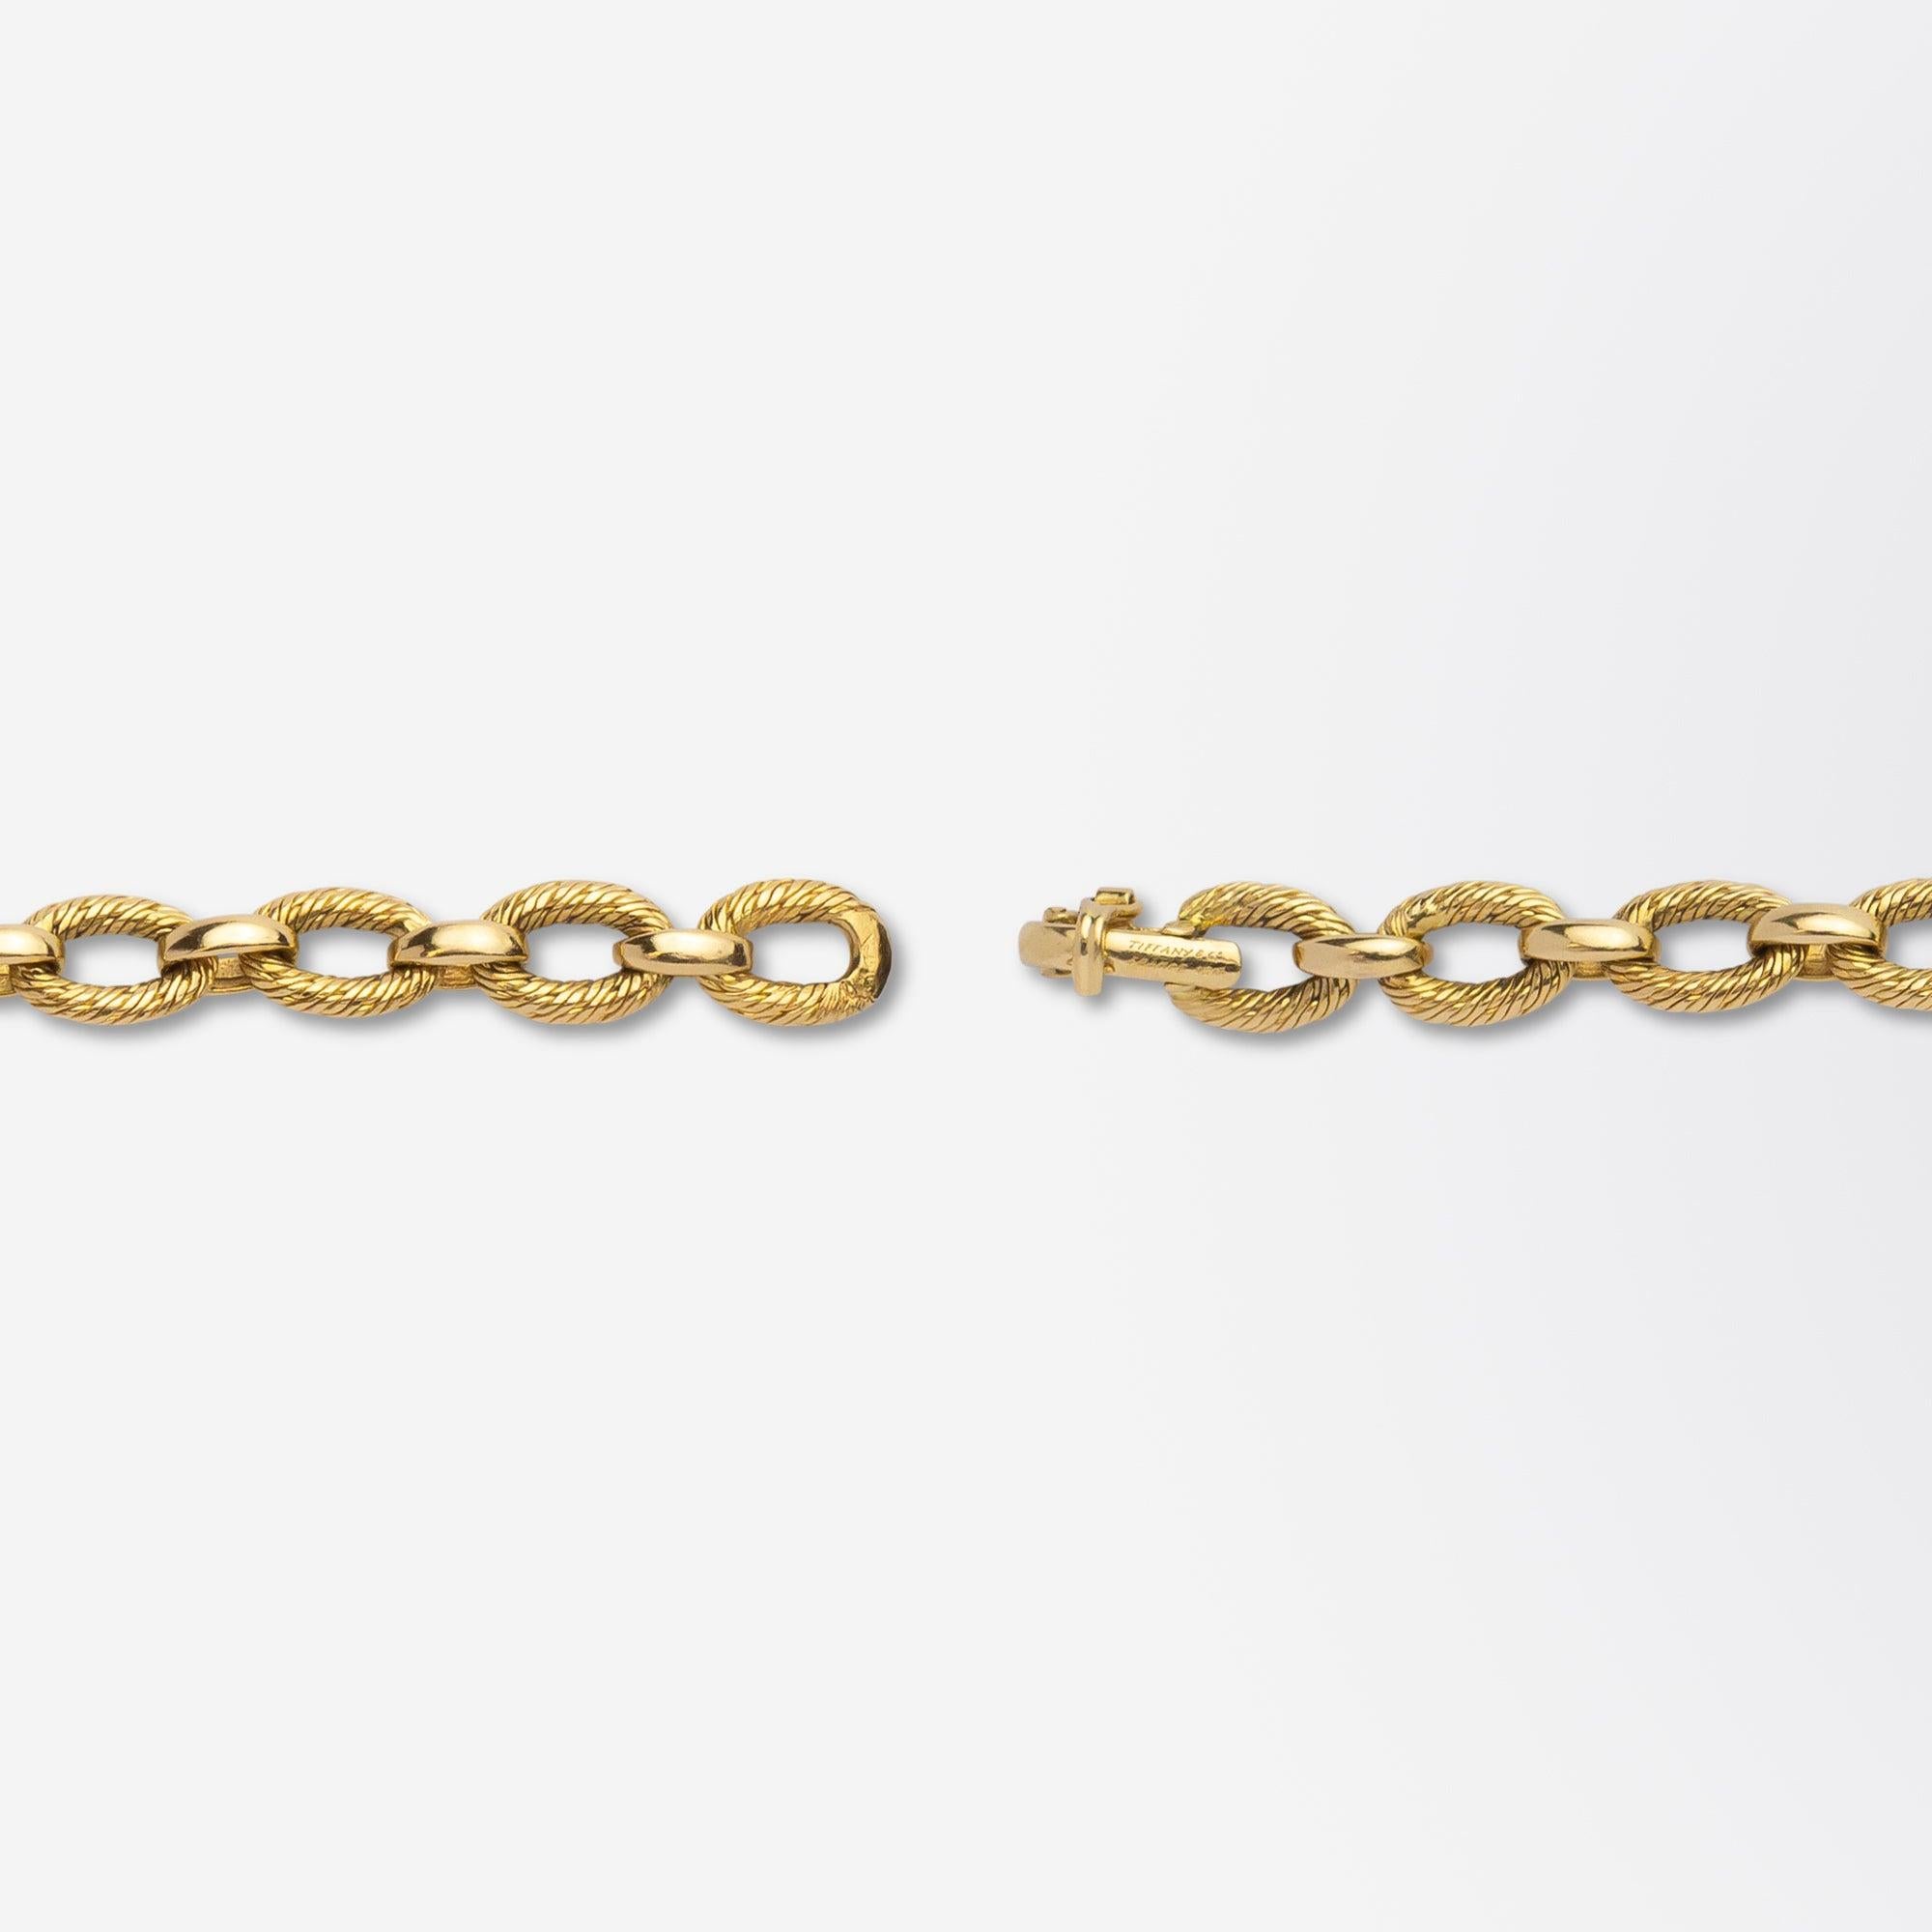 A fine 18 karat yellow gold bracelet manufactured by French goldsmith Georges L'Enfant for retail by Tiffany & Co. The bracelet features interconnecting links with oval 'woven' loops of fine 18 karat gold wire that are attached to simple gold jump